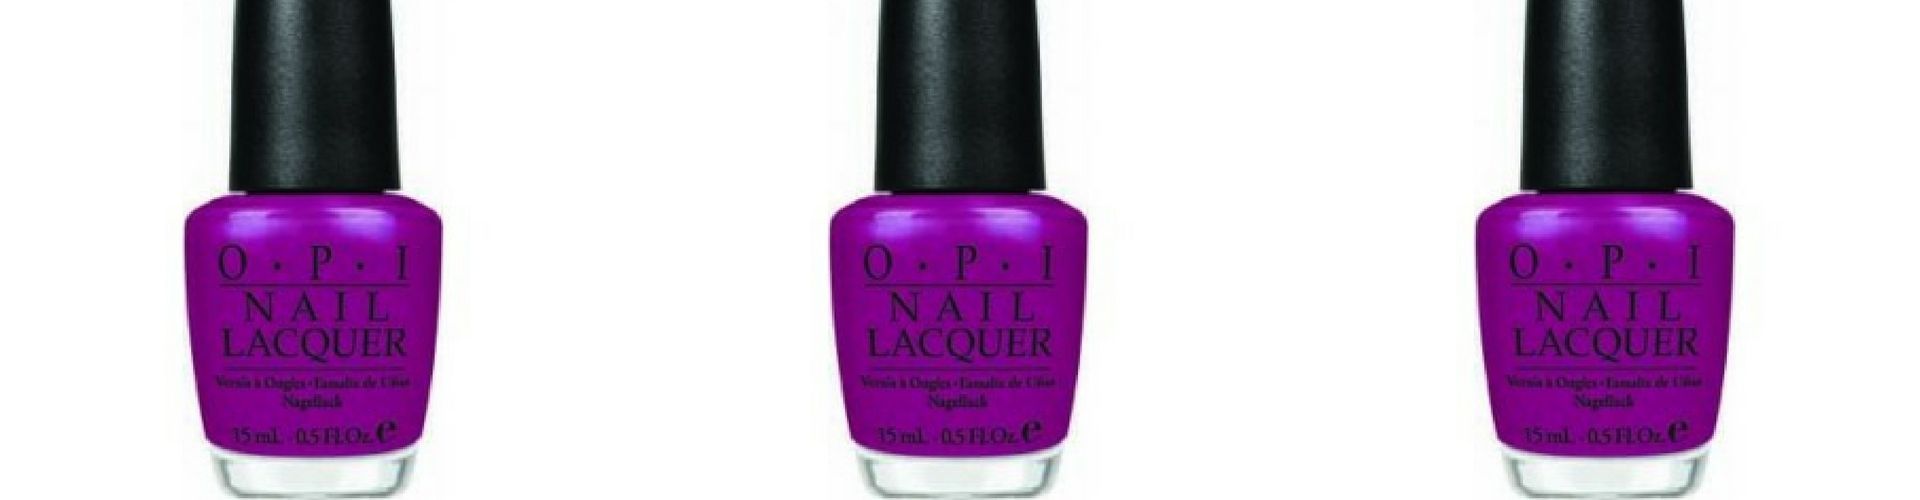 Touring Texas with OPI’s The Texas Collection